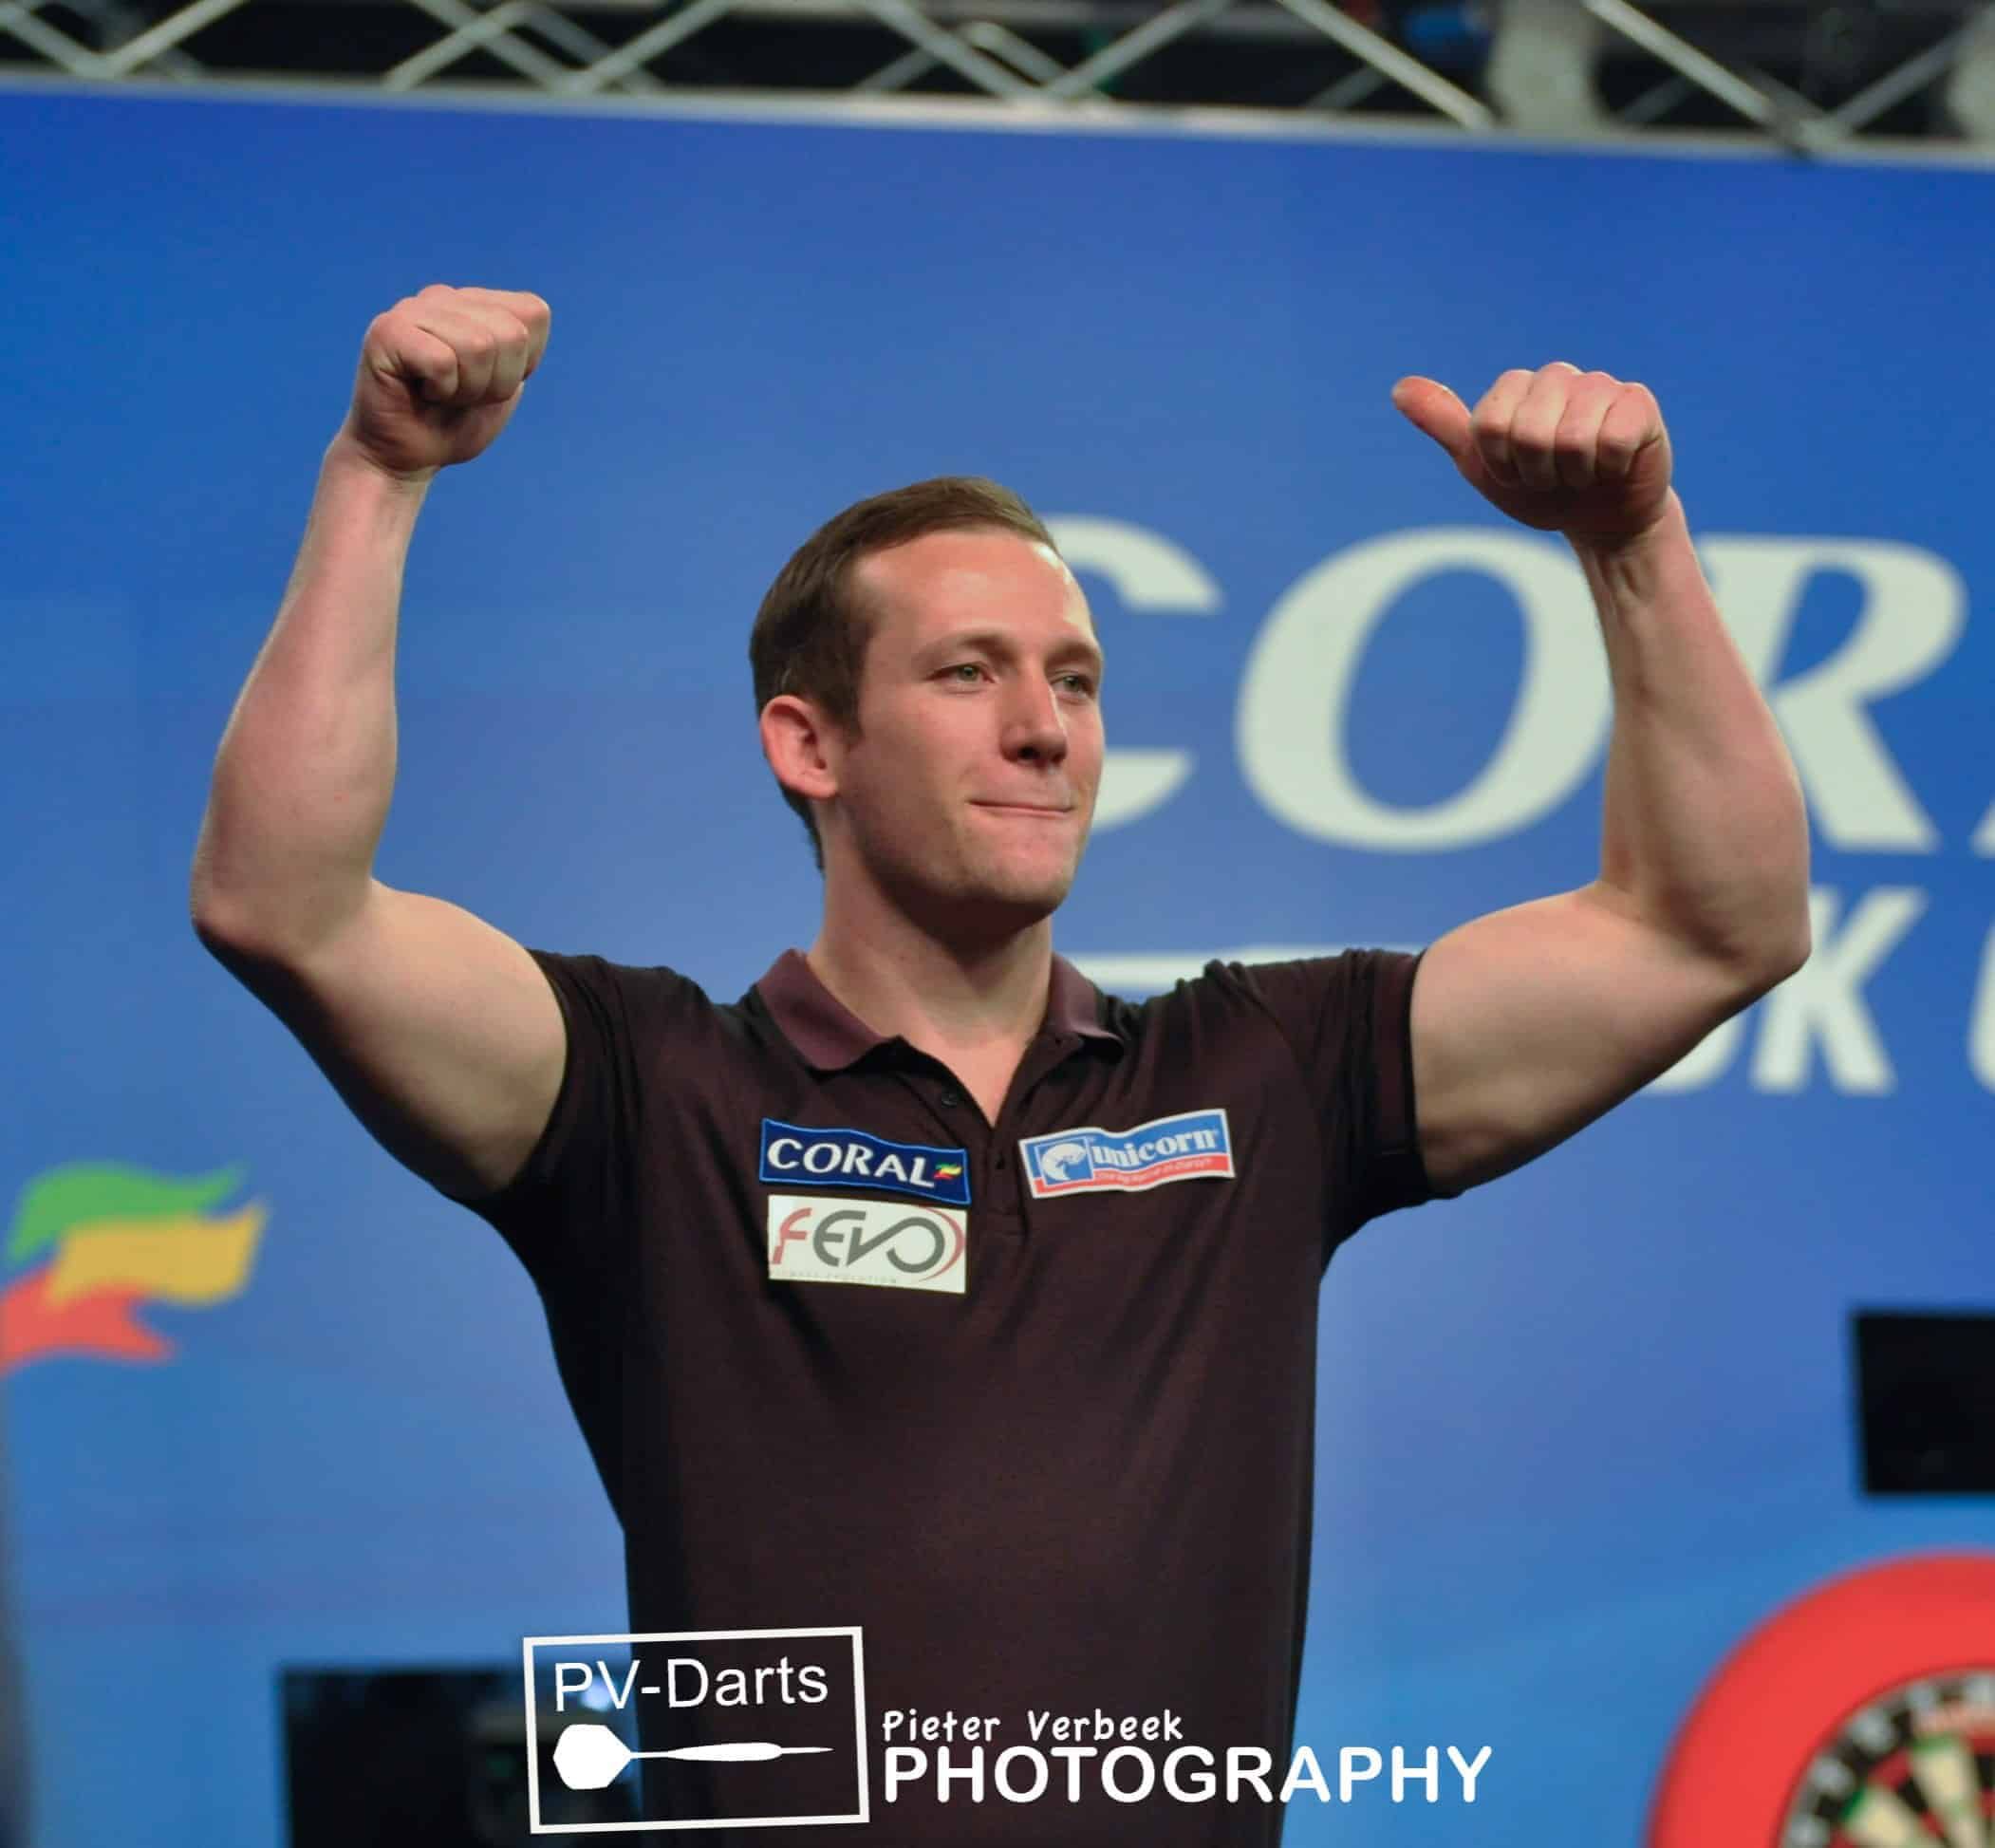 PDC World Championship 2020 First Round preview: Arron Monk vs Jose Justicia